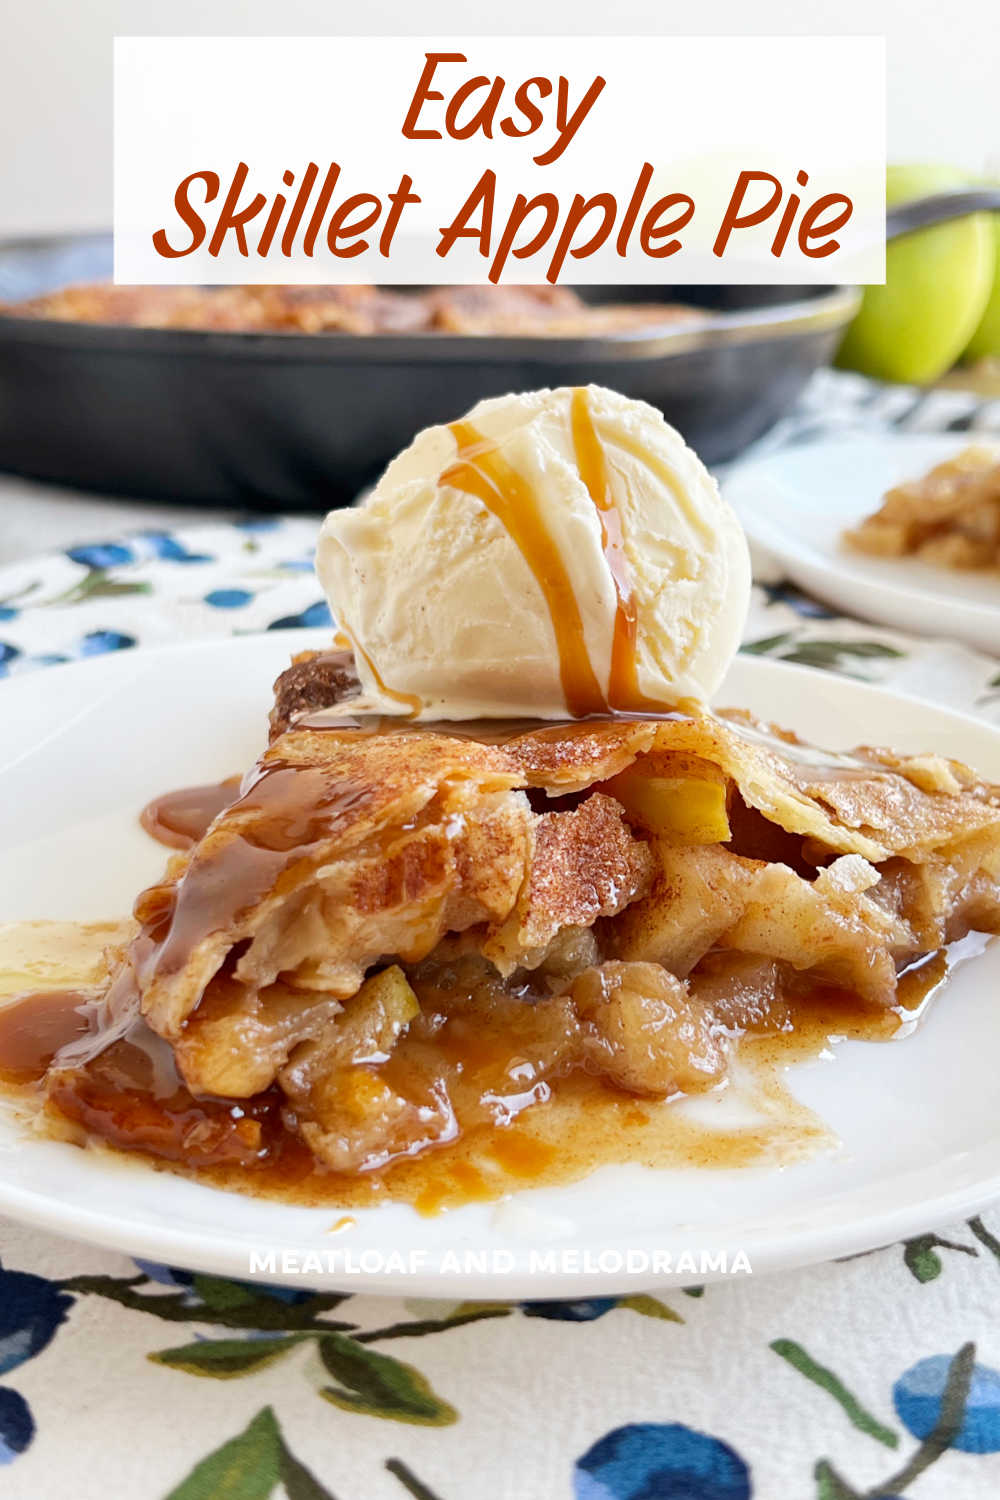 This Easy Skillet Apple Pie recipe with fresh apples and refrigerated pie crust is an easy dessert baked in a cast iron skillet in a delicious caramel sauce.  It's the perfect fall dessert! via @meamel